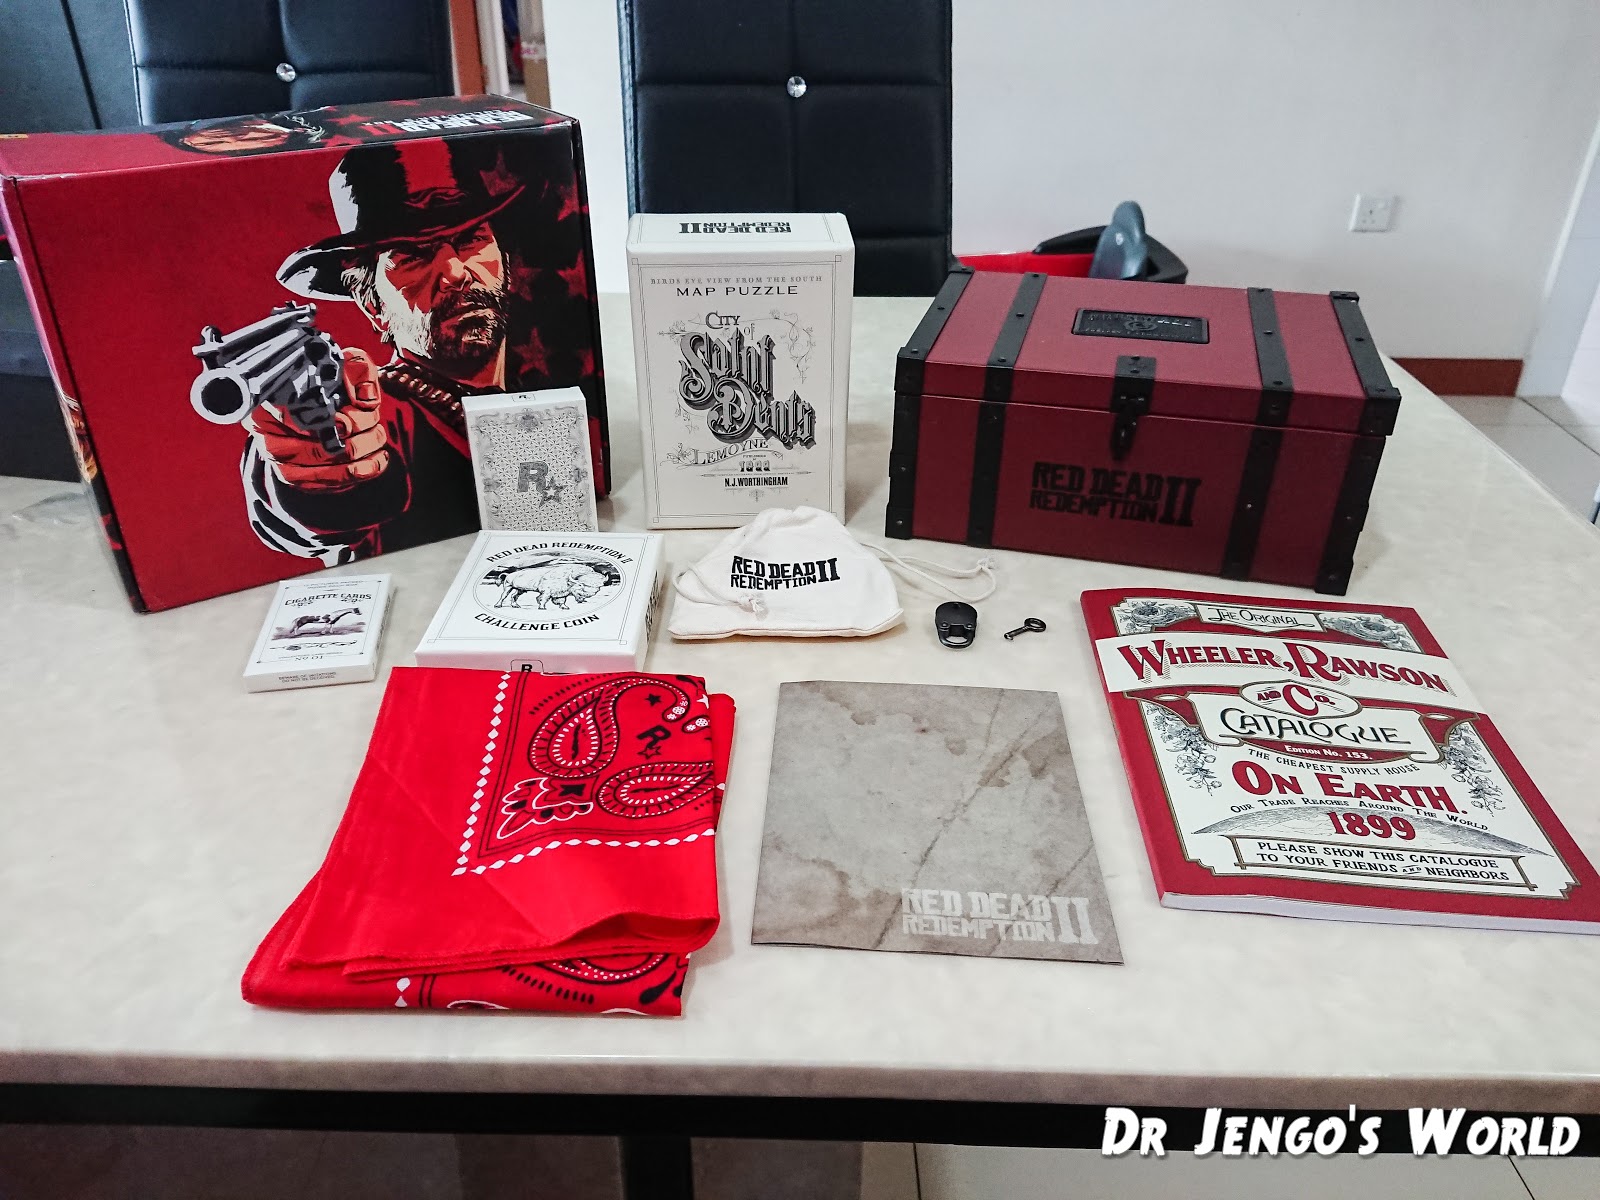 Vedrørende Kan beregnes succes Dr Jengo's World: Red Dead Redemption 2 Collector's Box Collection Pics